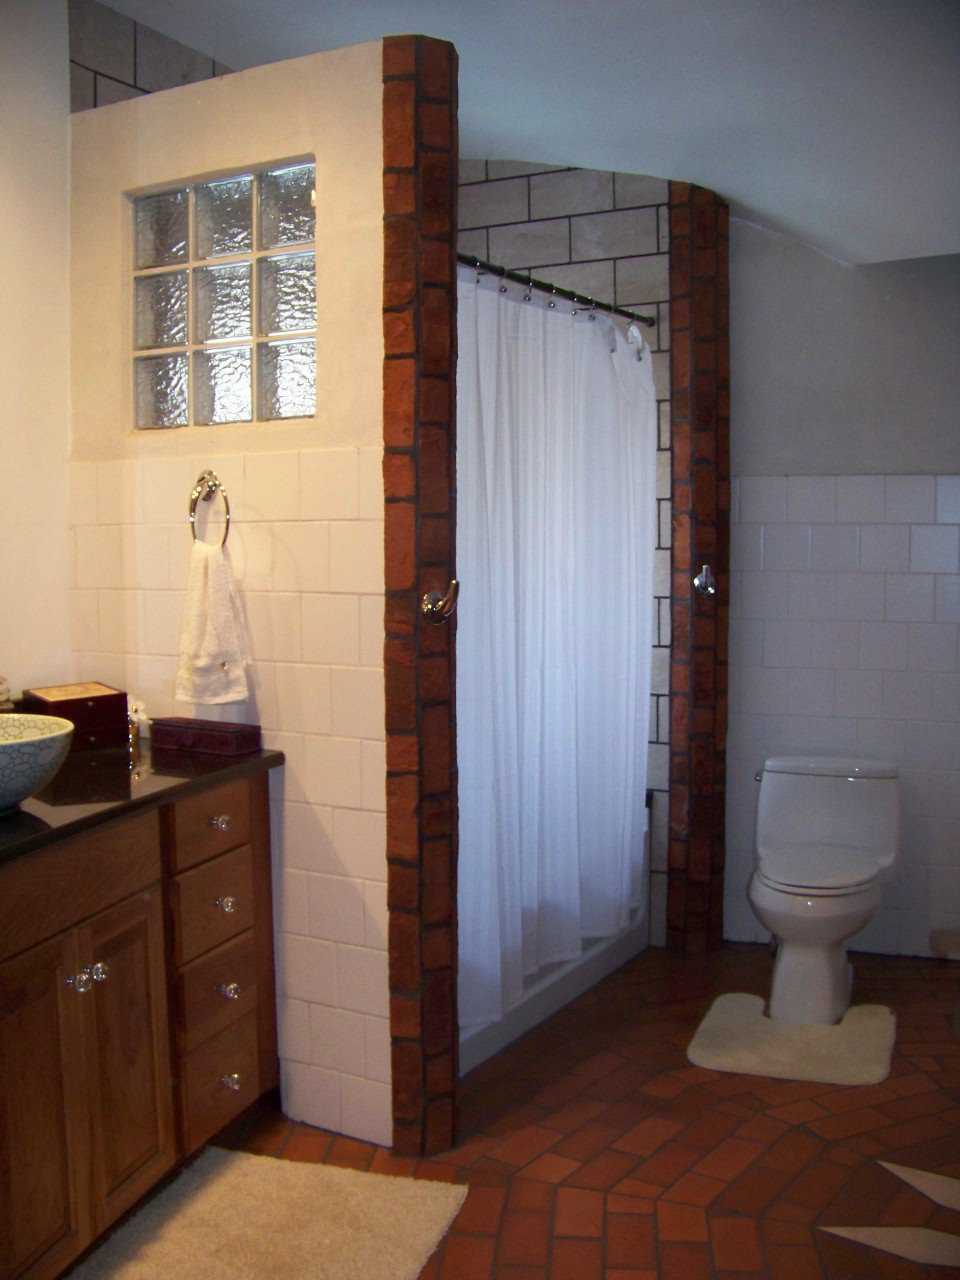 Tile shower — This bathroom sports tile walls and a brick floor with an eye-catching design.